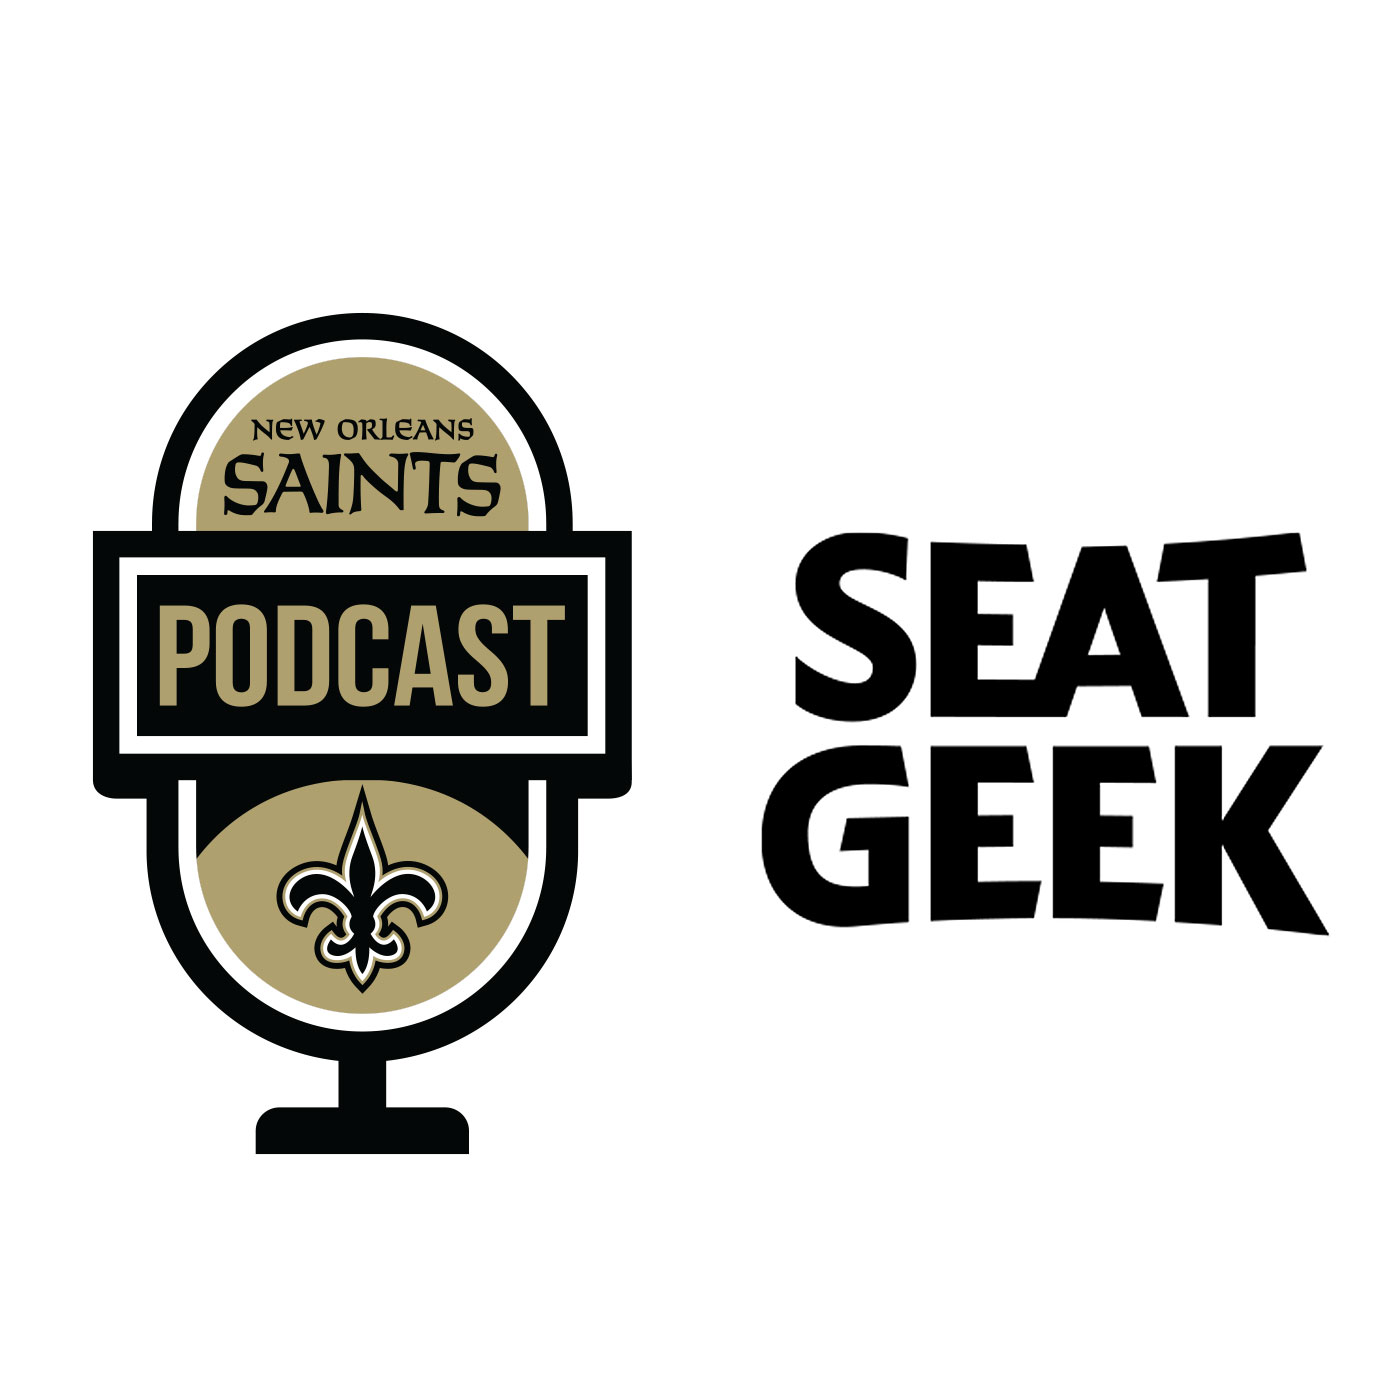 Kenny Albert on Saints Podcast presented by SeatGeek | October 1, 2021